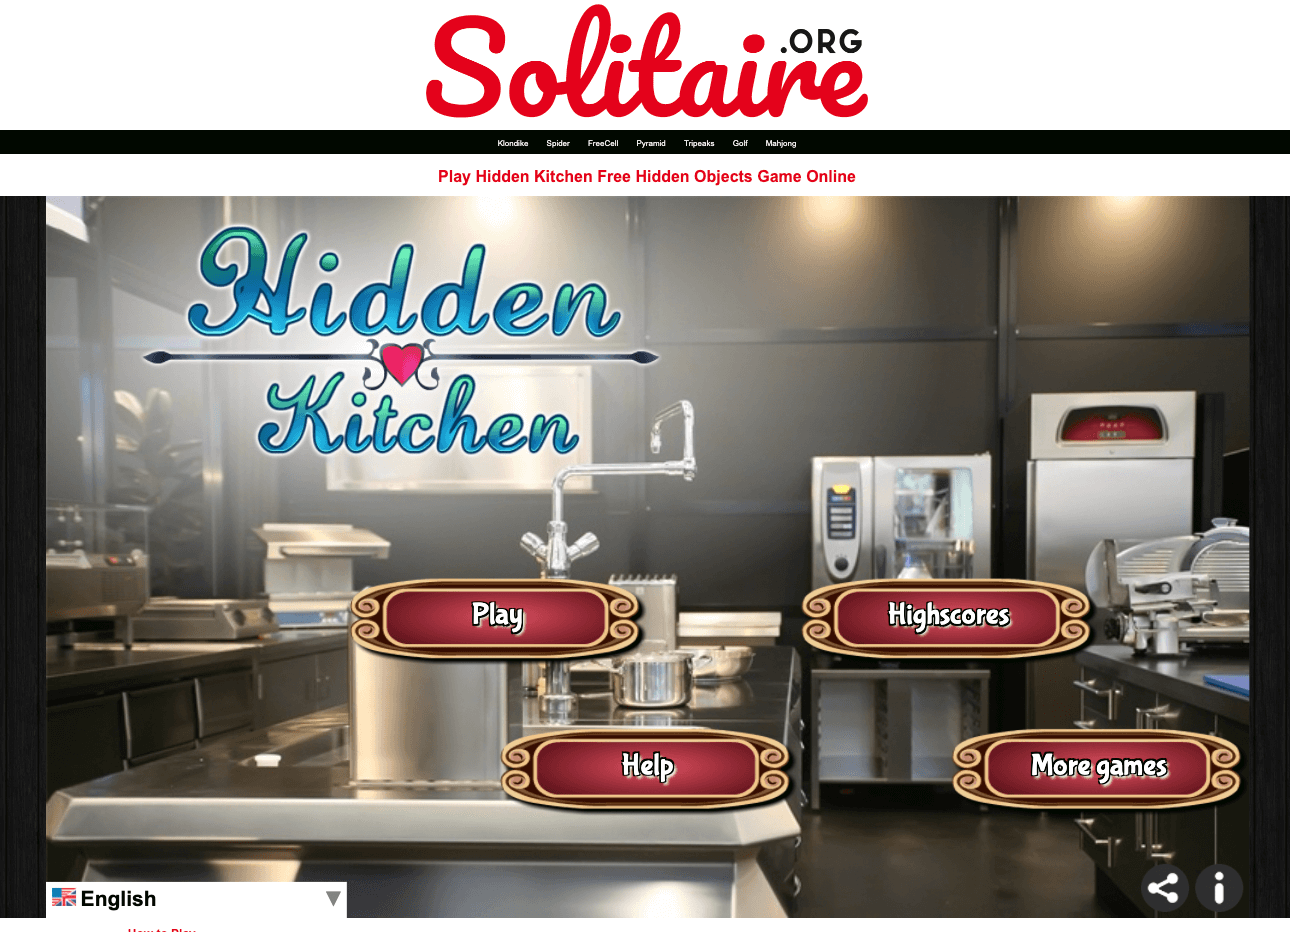 solitaire.org review